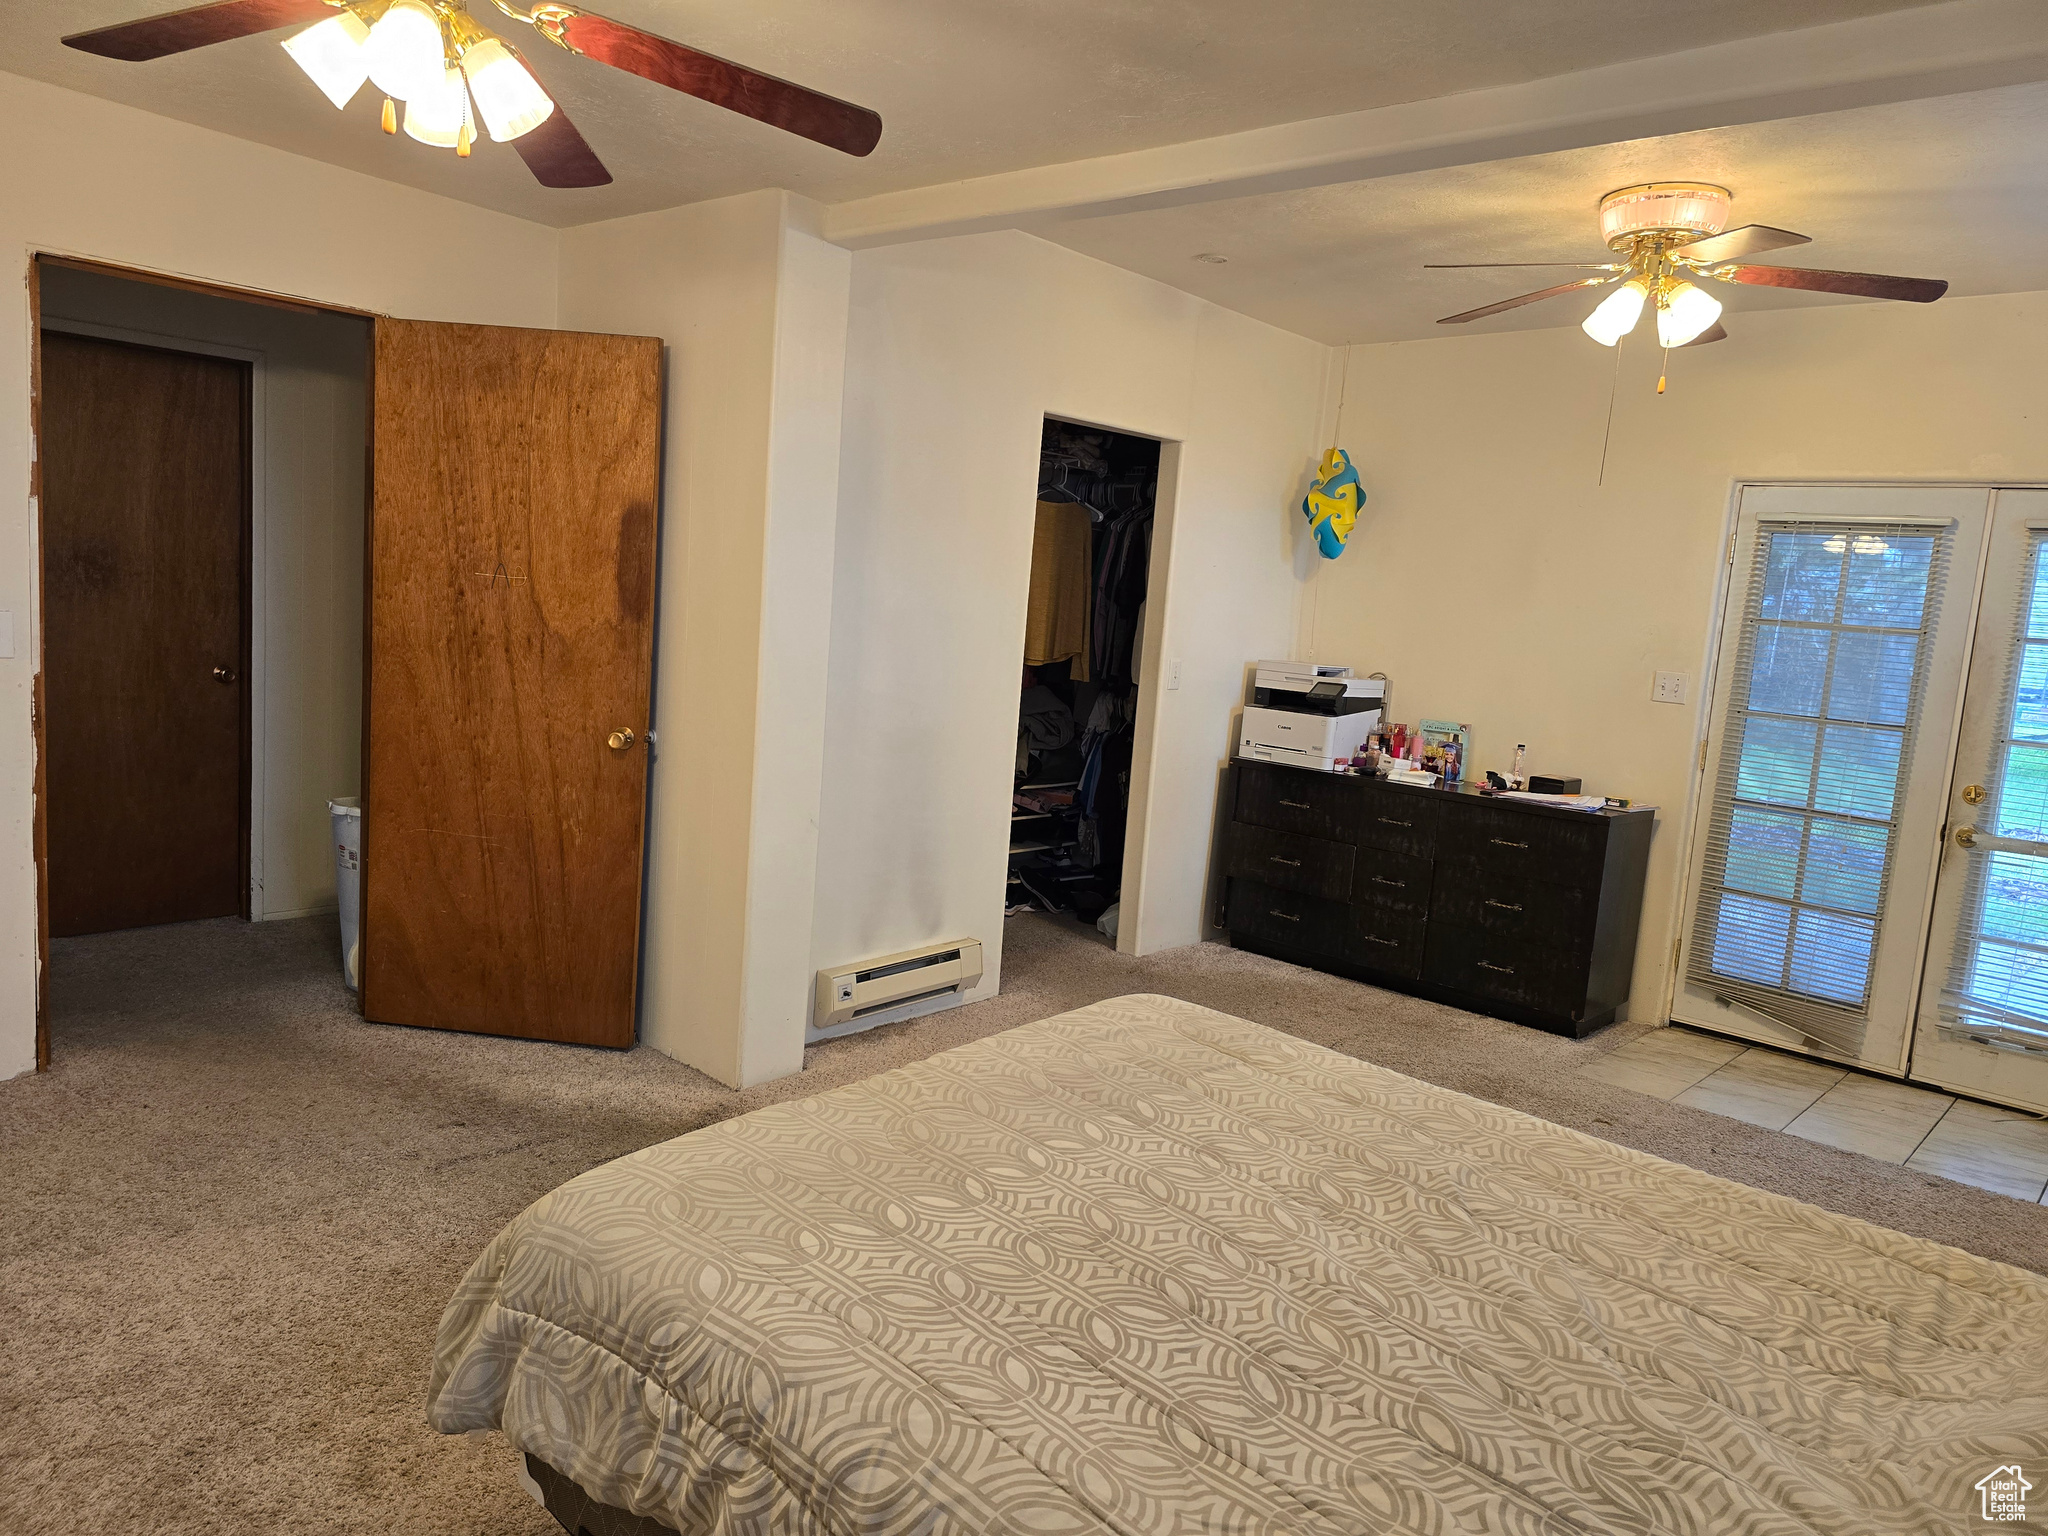 Carpeted bedroom featuring a spacious closet, access to outside, ceiling fan, and baseboard heating